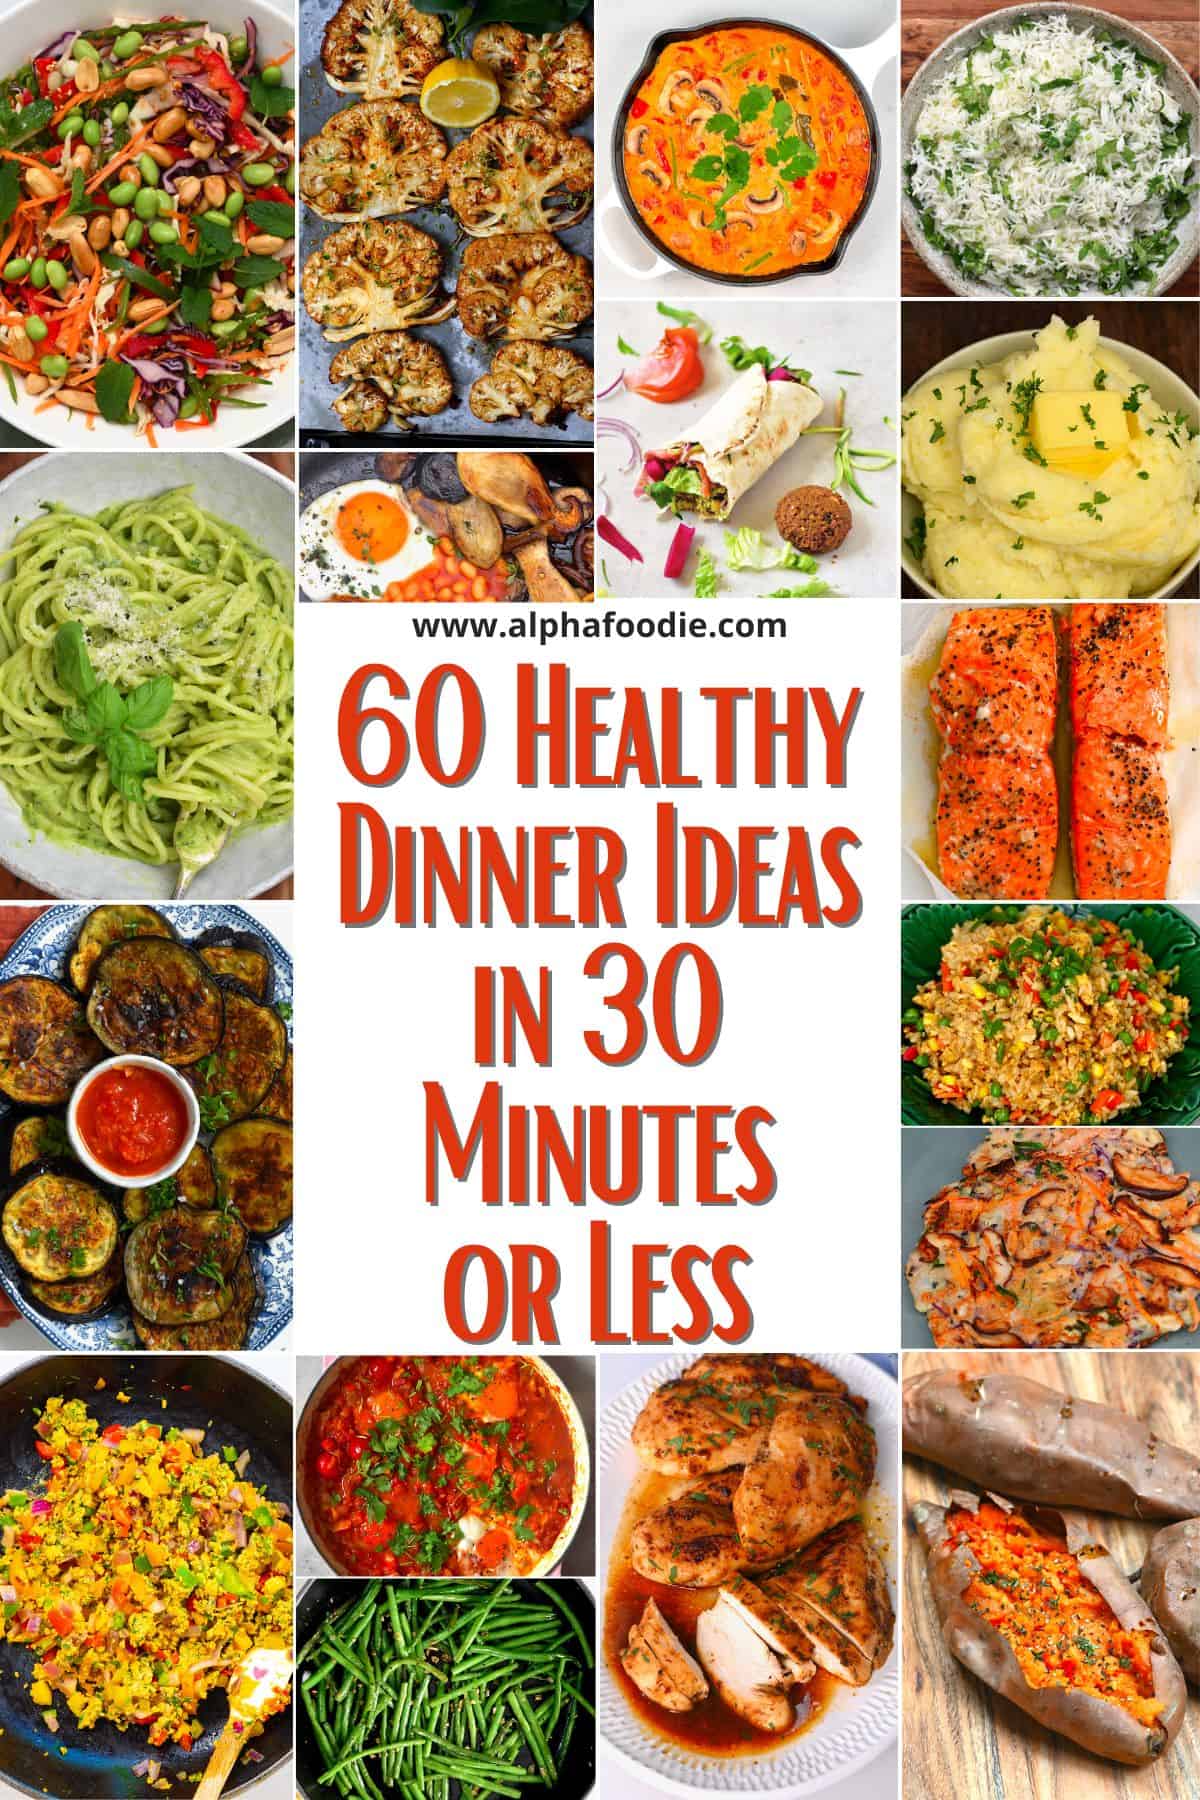 60 Healthy Dinner Ideas in 30 Minutes or Less - Alphafoodie